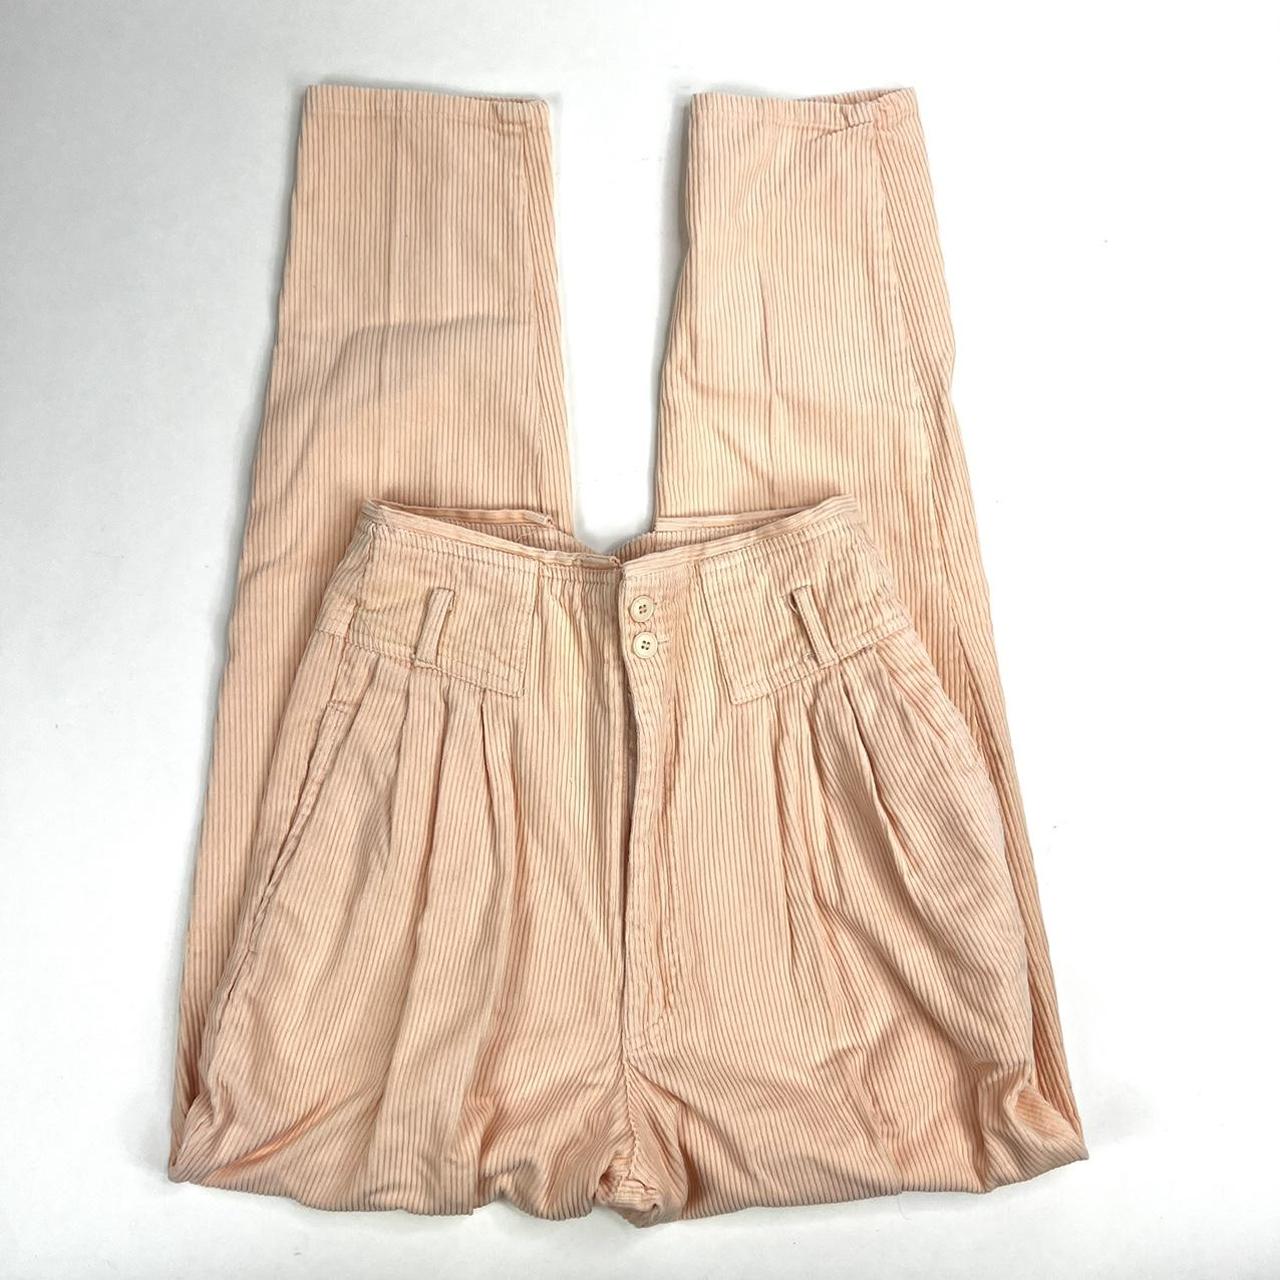 Product Image 2 - 80s/90s Vintage High Waisted Cords,